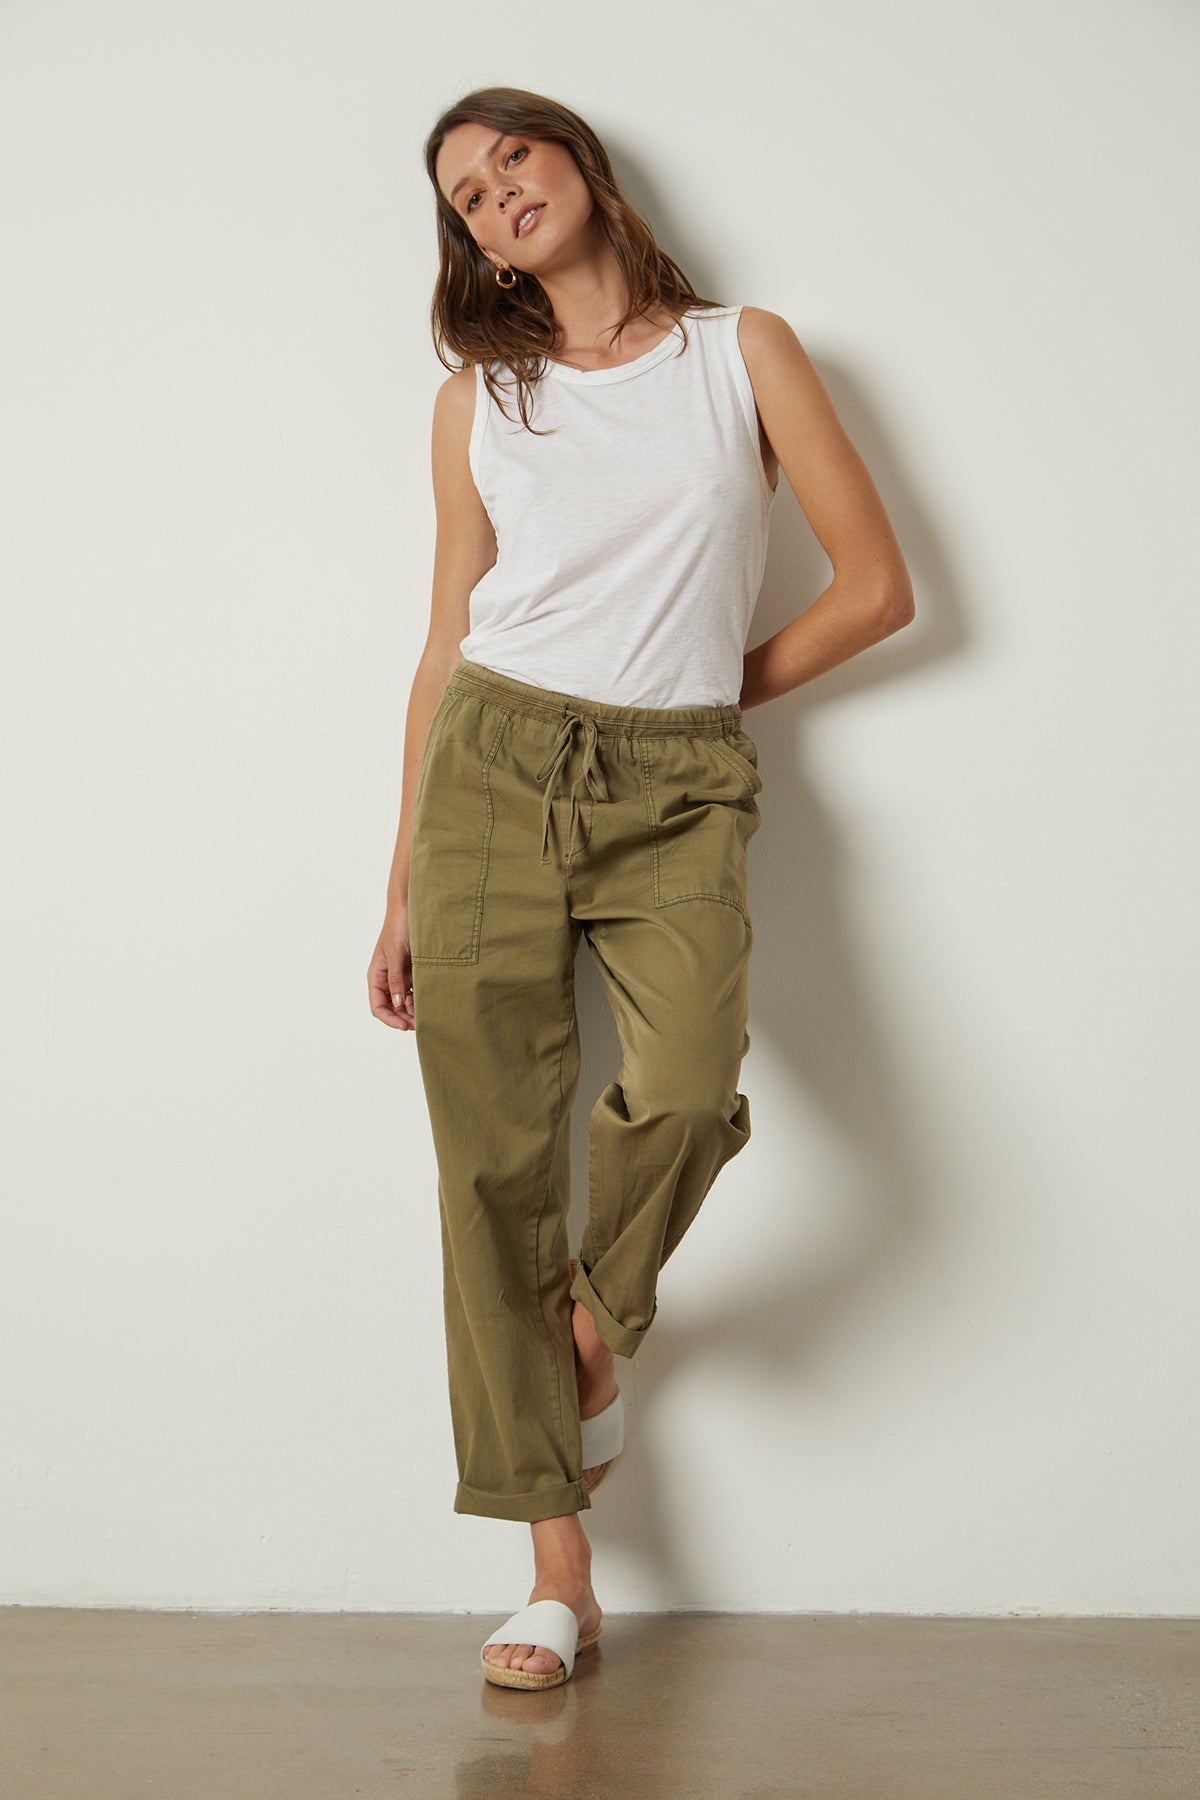 Misty Pant in forest twill with Taurus Tank tucked full length front with white slides-26496414712001